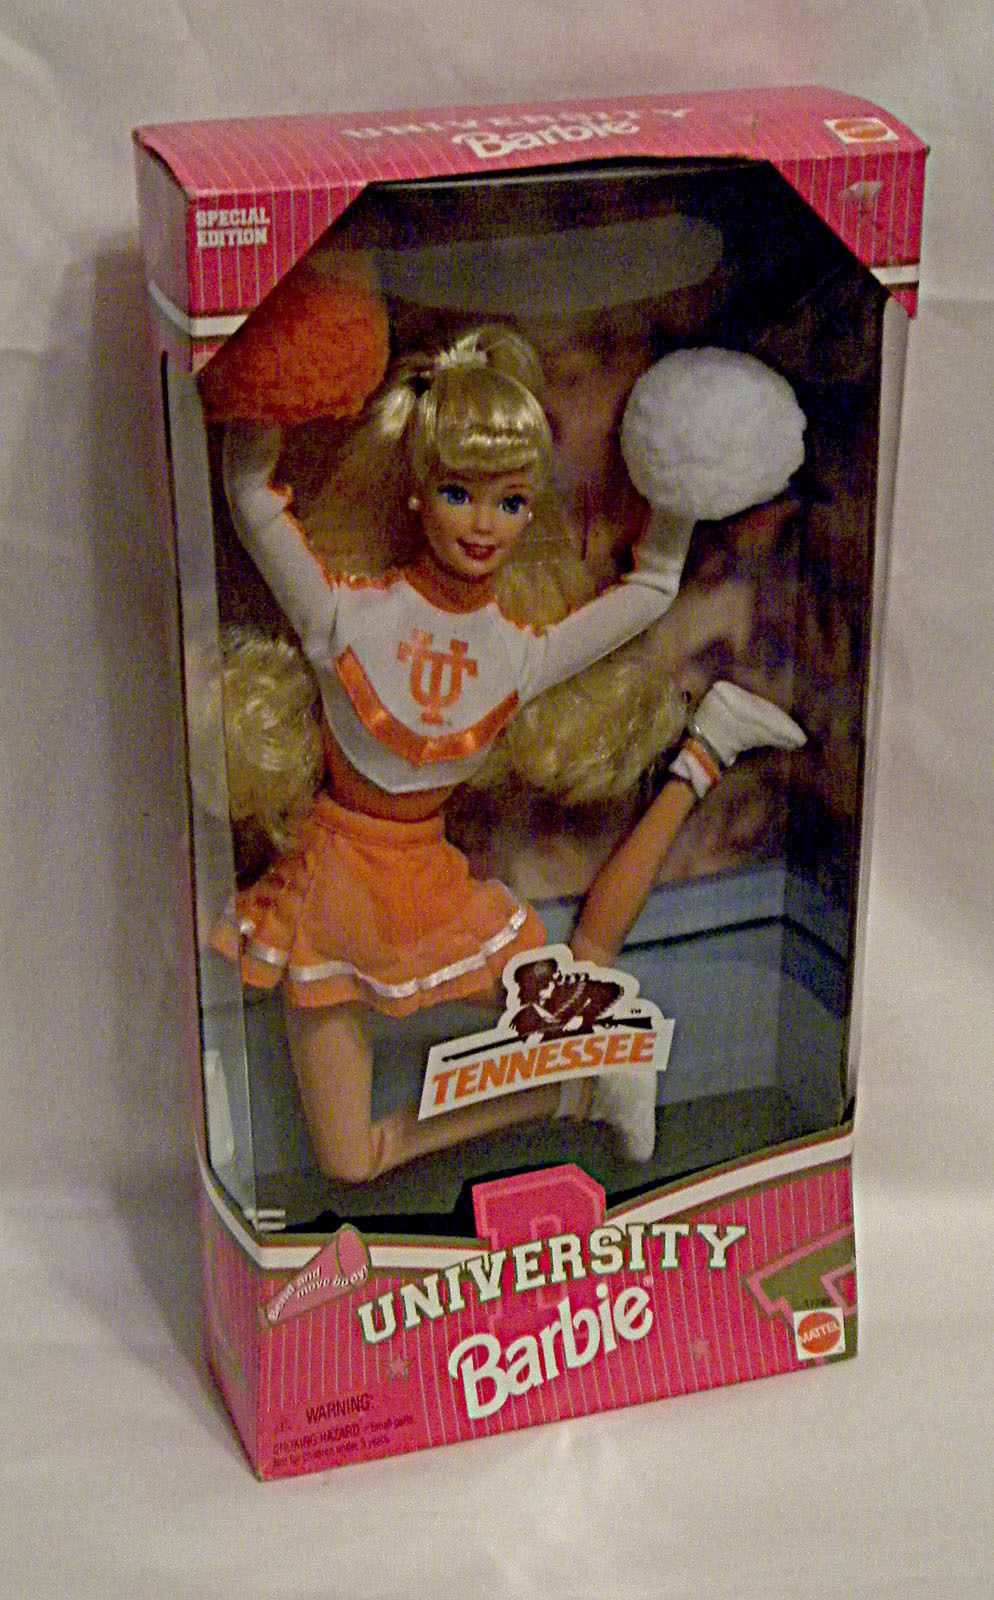 Primary image for 1996 Barbie Special Edition Doll  University of Tennessee Cheerleader  